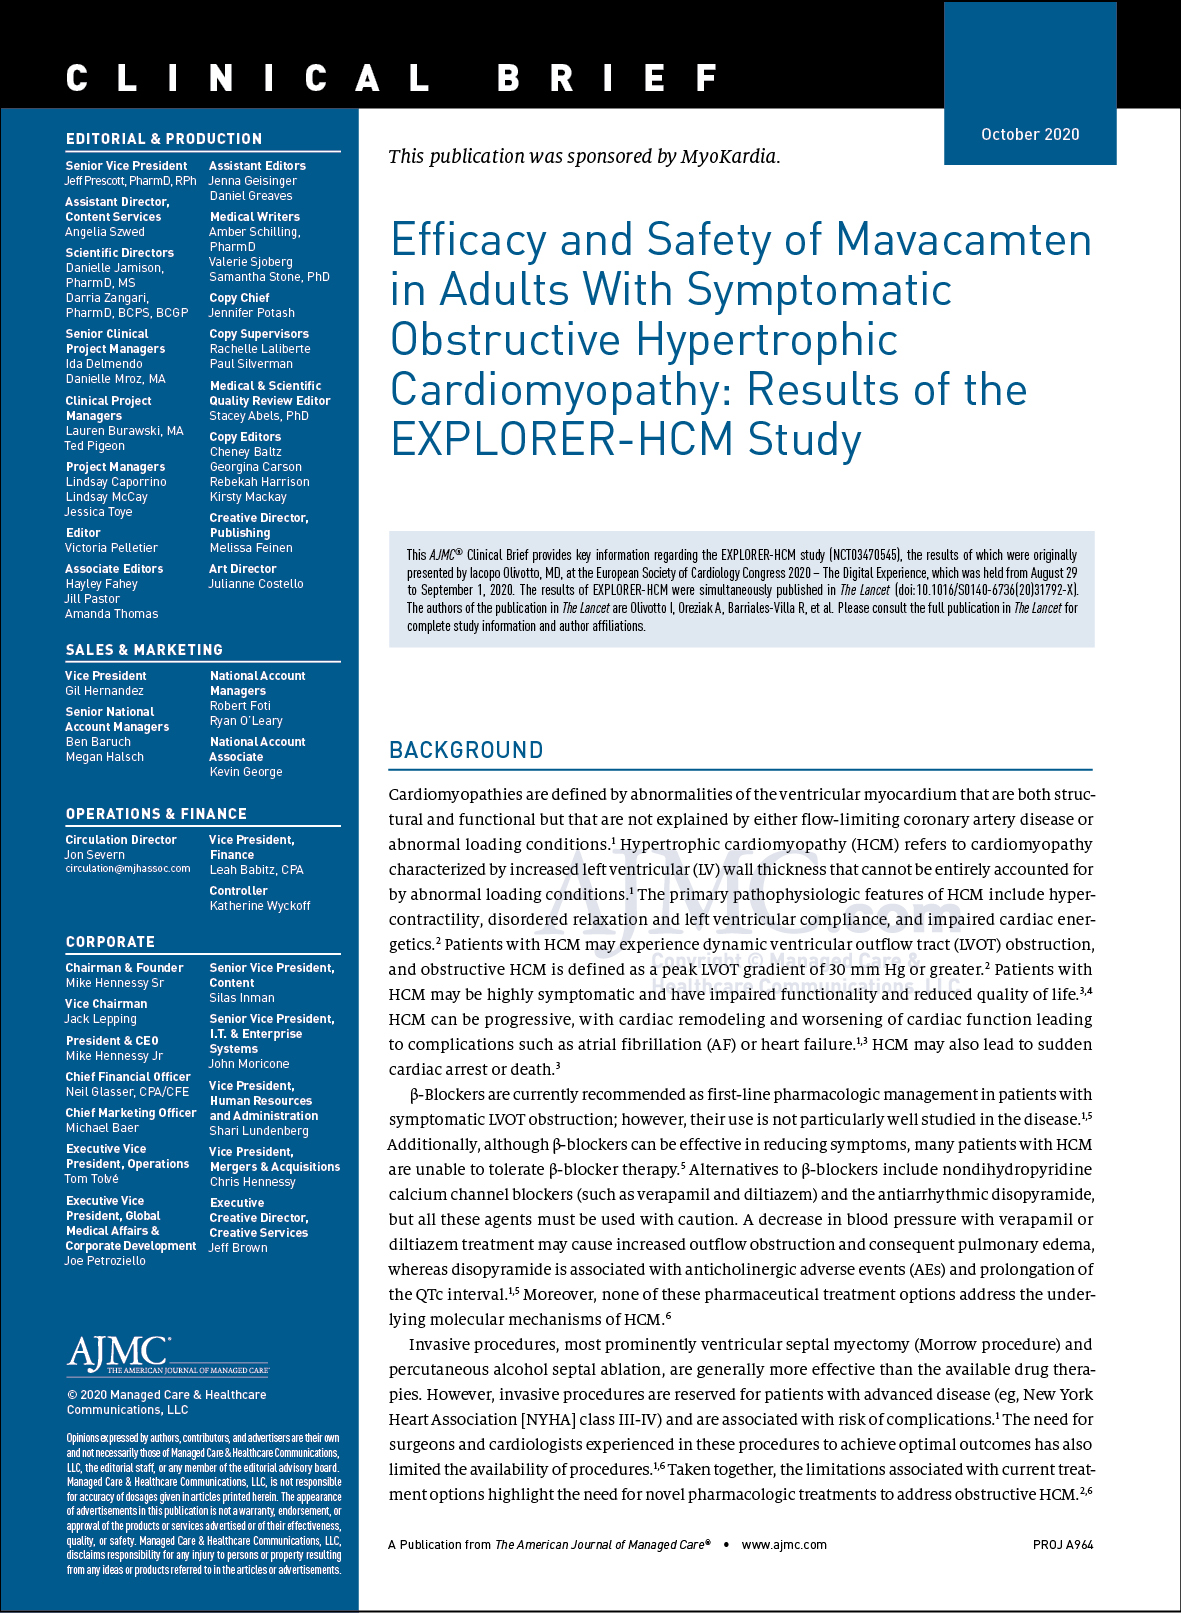 Efficacy and Safety of Mavacamten in Adults With Symptomatic Obstructive Hypertrophic Cardiomyopathy: Results of the EXPLORER-HCM Study